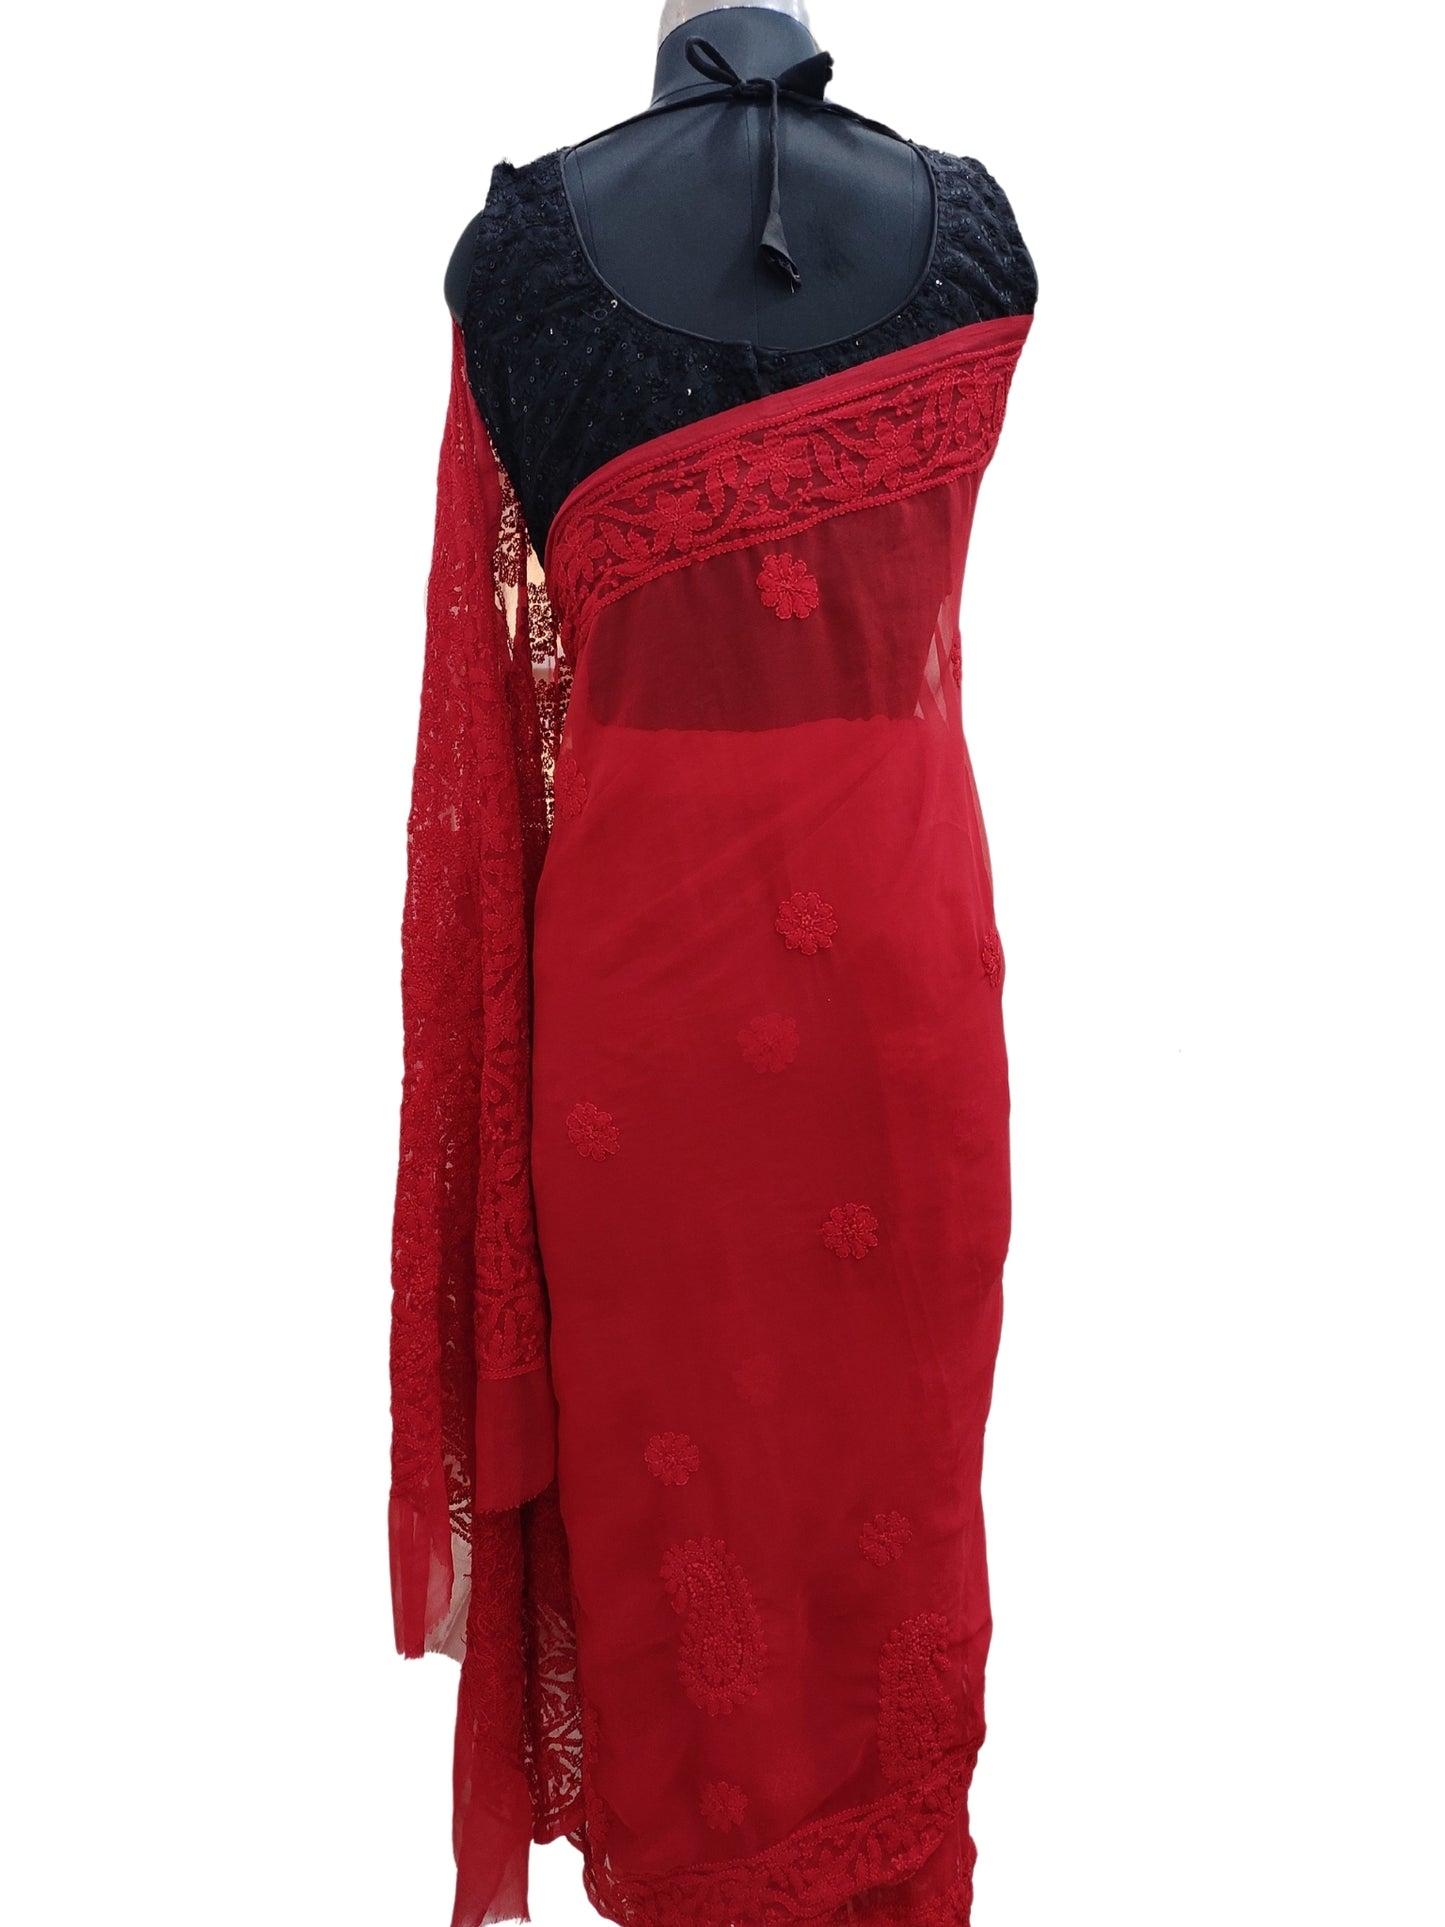 Shyamal Chikan Hand Embroidered Red Georgette Lucknowi Chikankari Skirt Saree With Blouse Piece - S21742